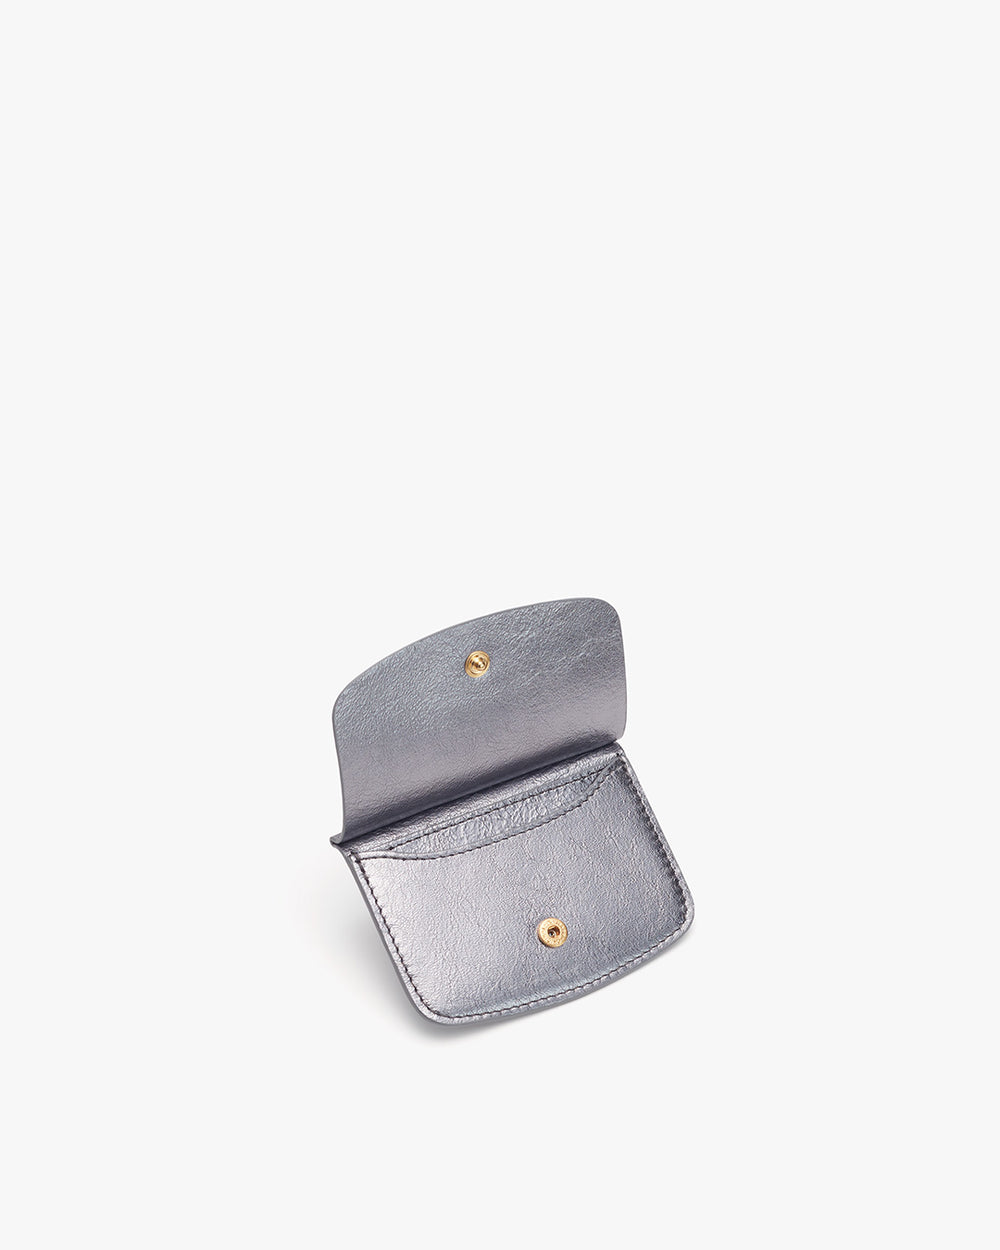 Open small wallet with snap fastener on a plain background.